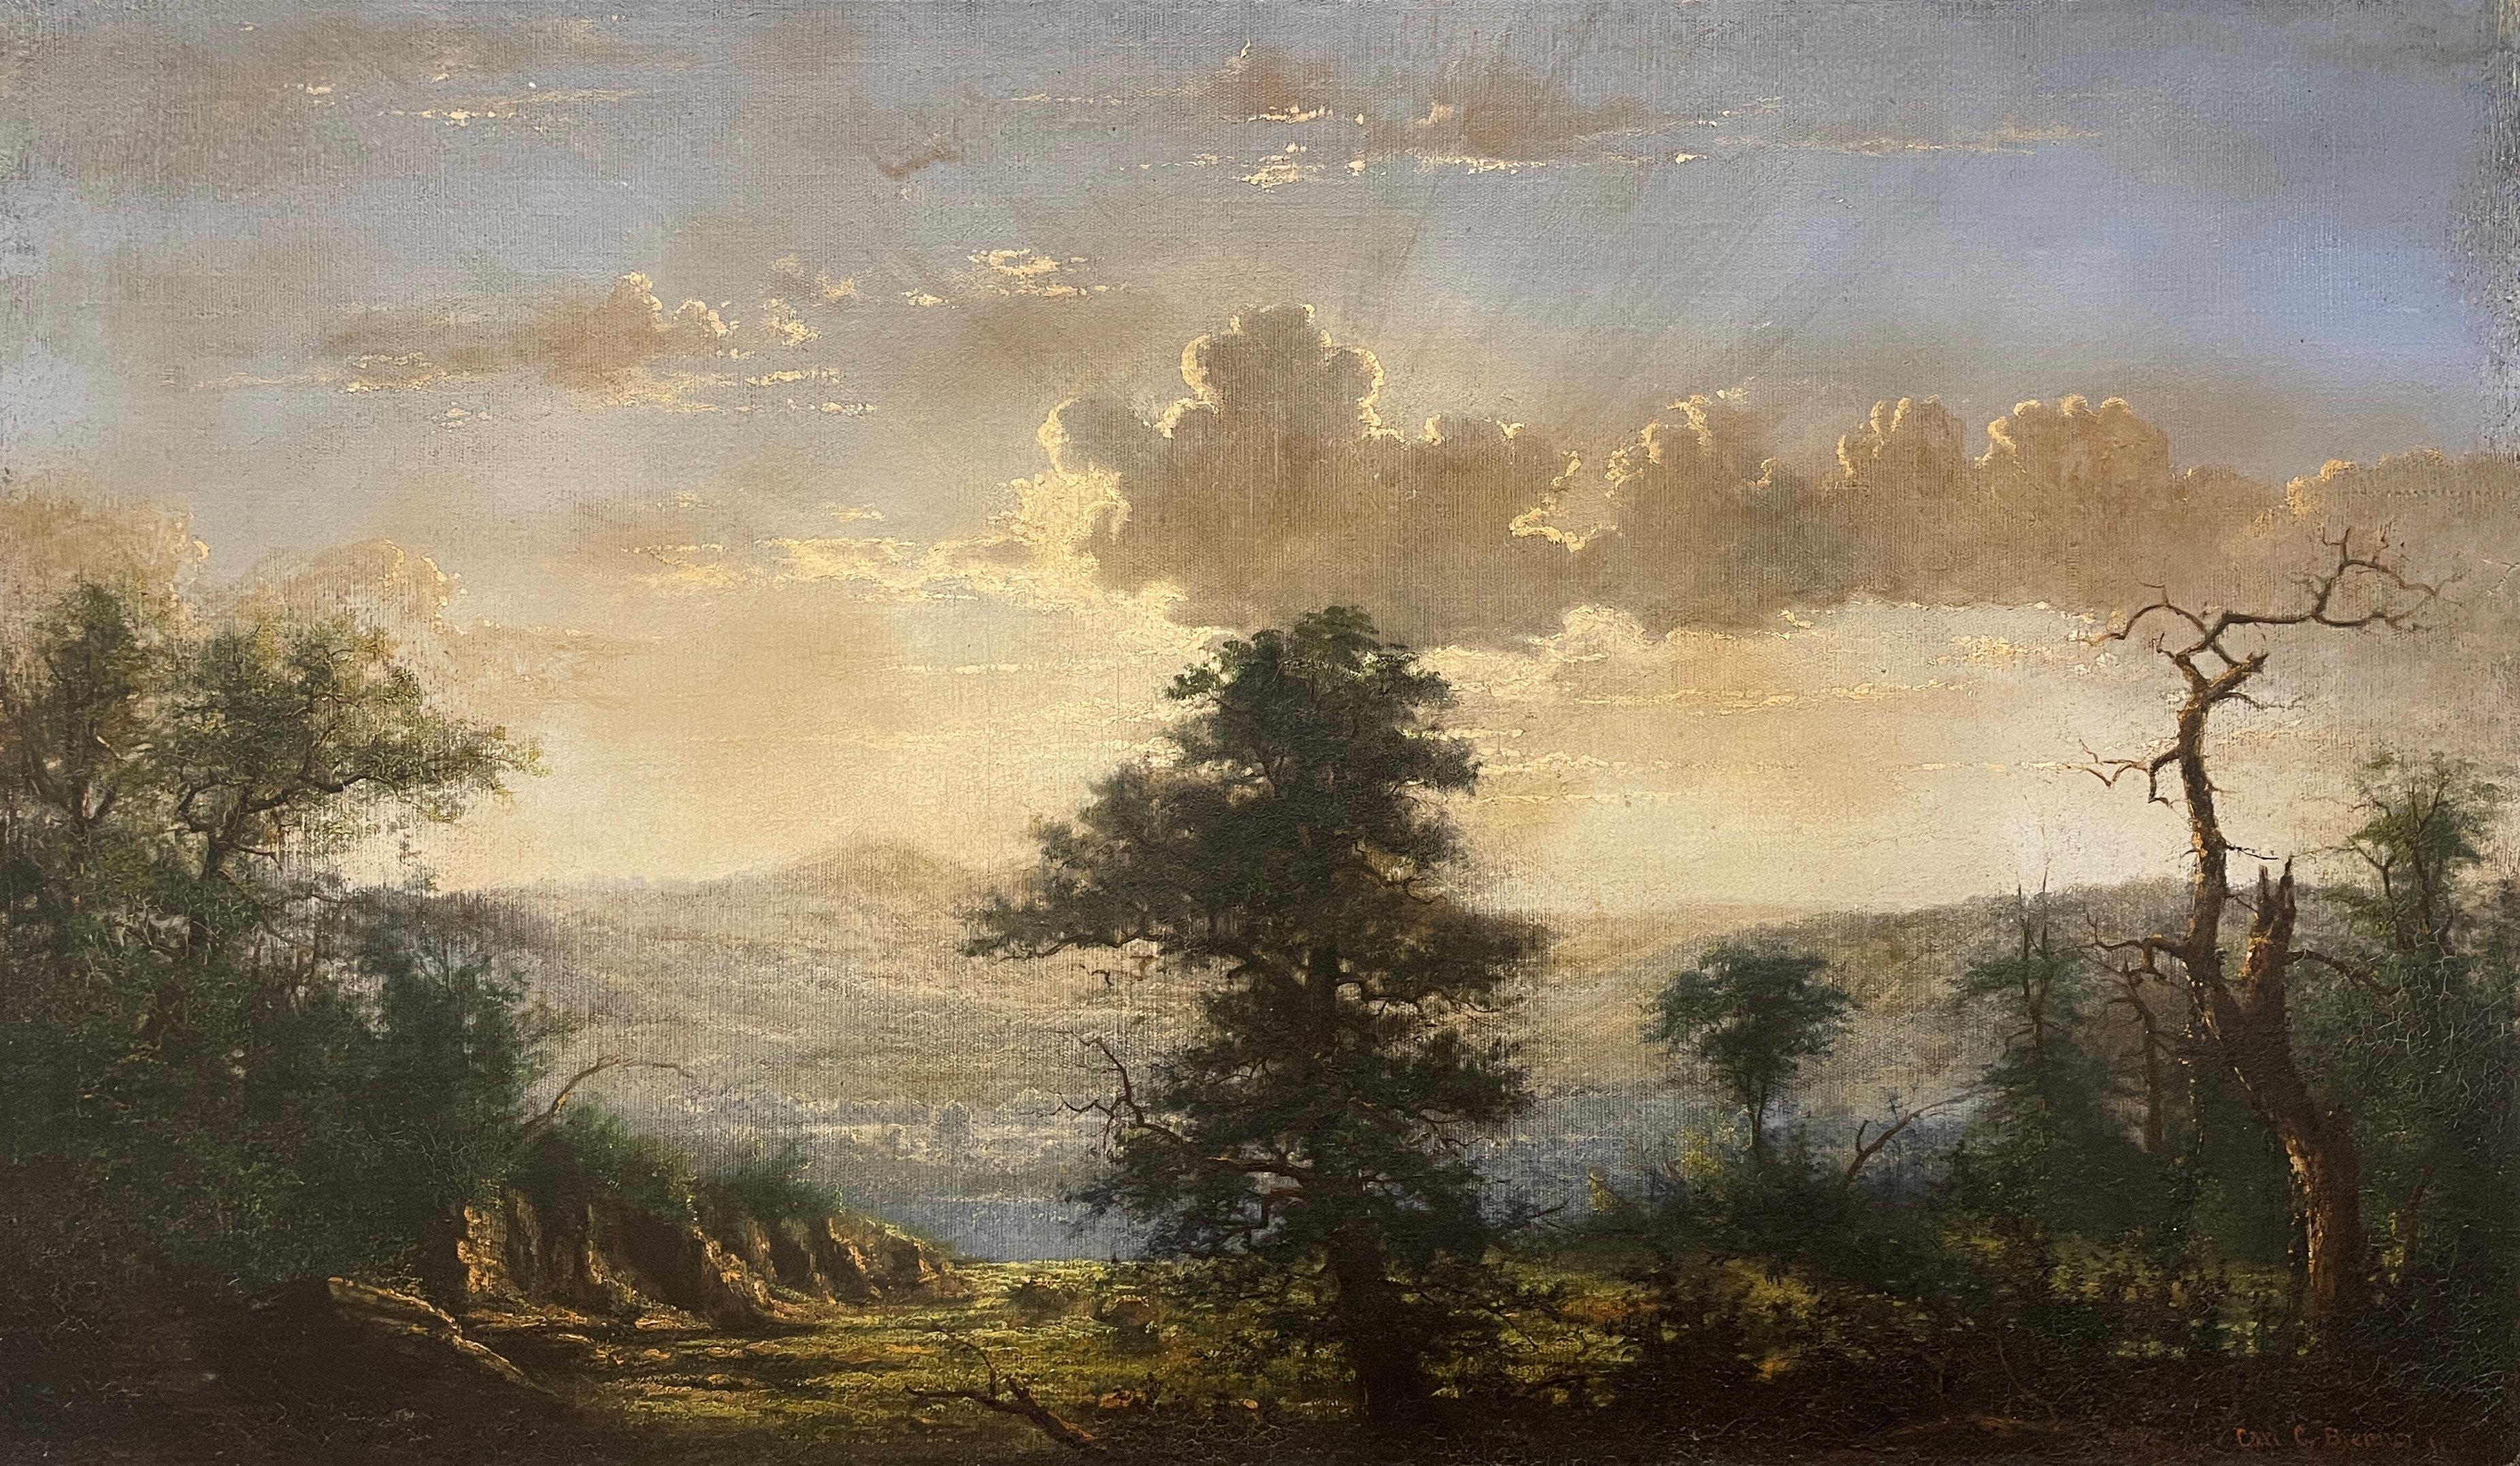 Carl Christian Brenner Landscape Painting - "Breaking Through the Clouds, Kentucky" Carl Brenner, Appalachia Landscape